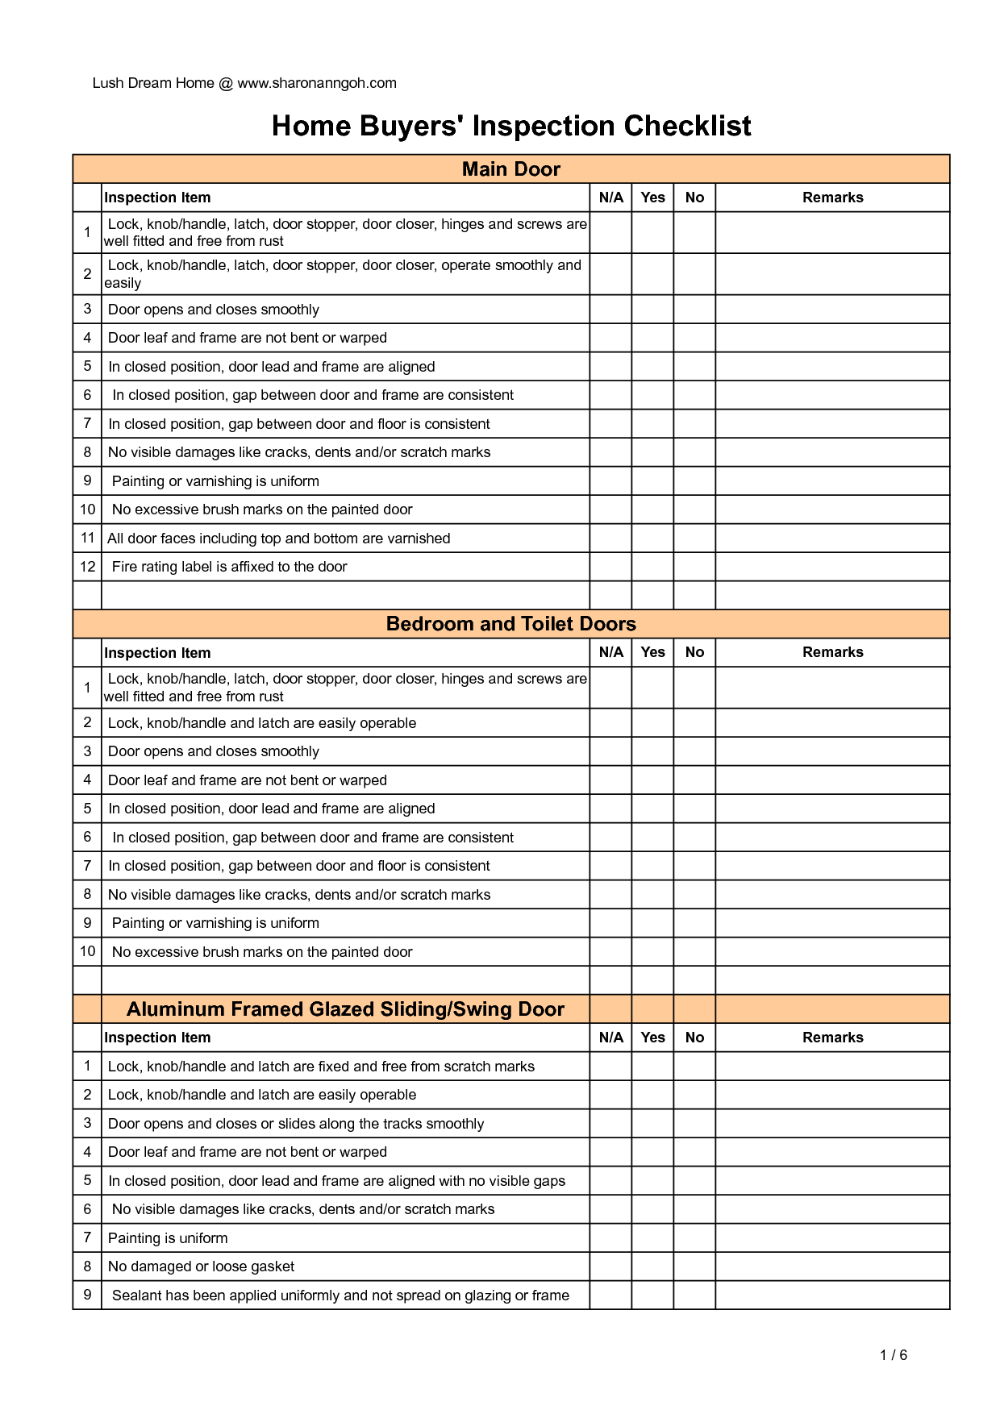 Creating A Home Inspection Checklist Using Microsoft Excel Can Be With Pre Purchase Building Inspect Inspection Checklist Home Buying Checklist Home Inspection